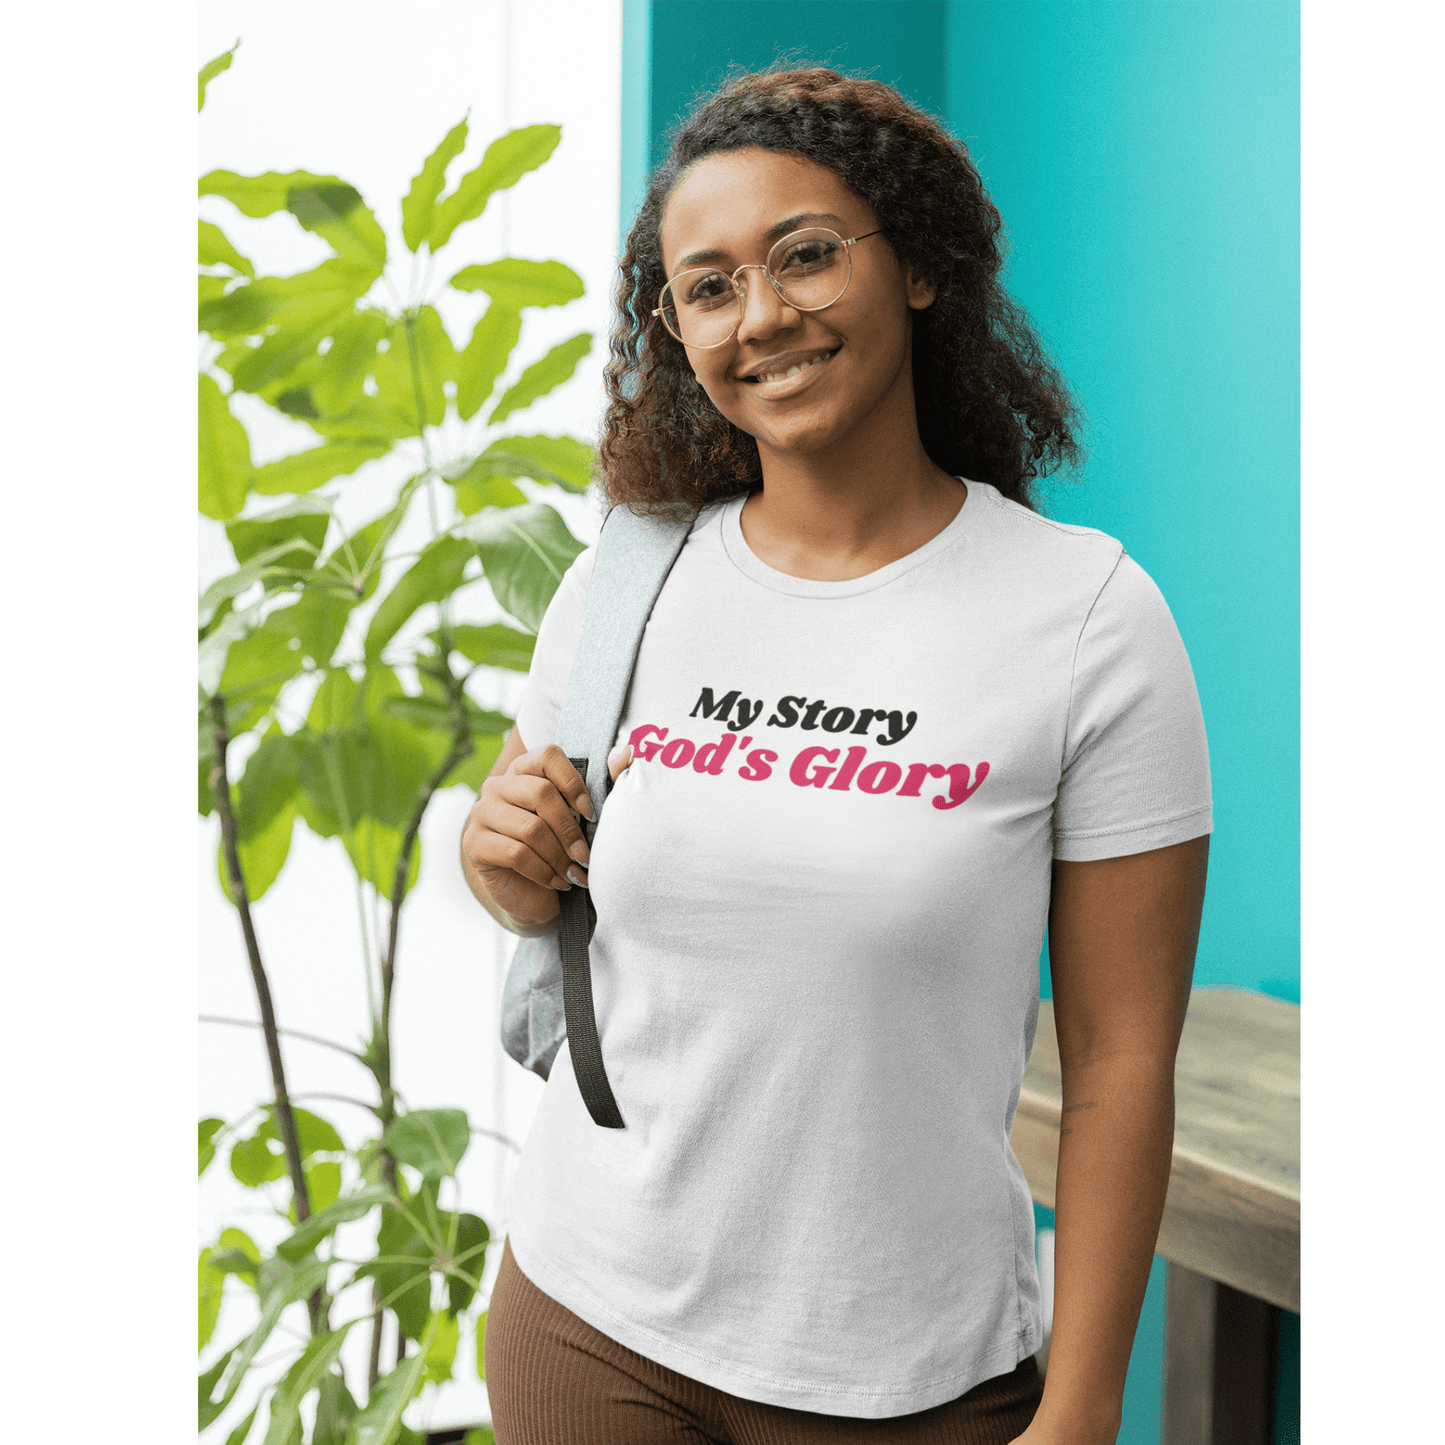 My Story, God's Glory (Graphic Black and Fuchsia Text) Unisex Jersey Short Sleeve Tee - Style: Bella+Canvas 3001